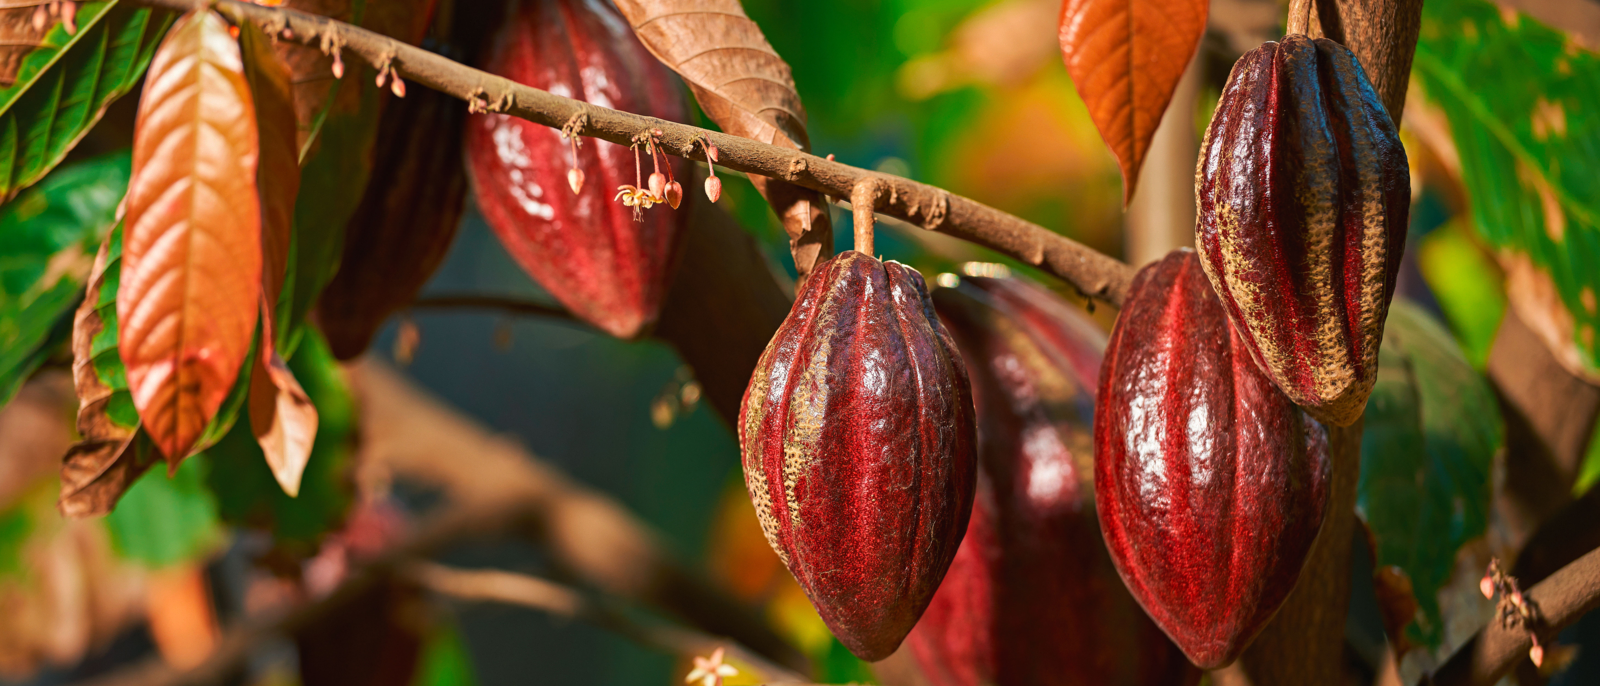 Group of red cocoa pods hanging on tree branch